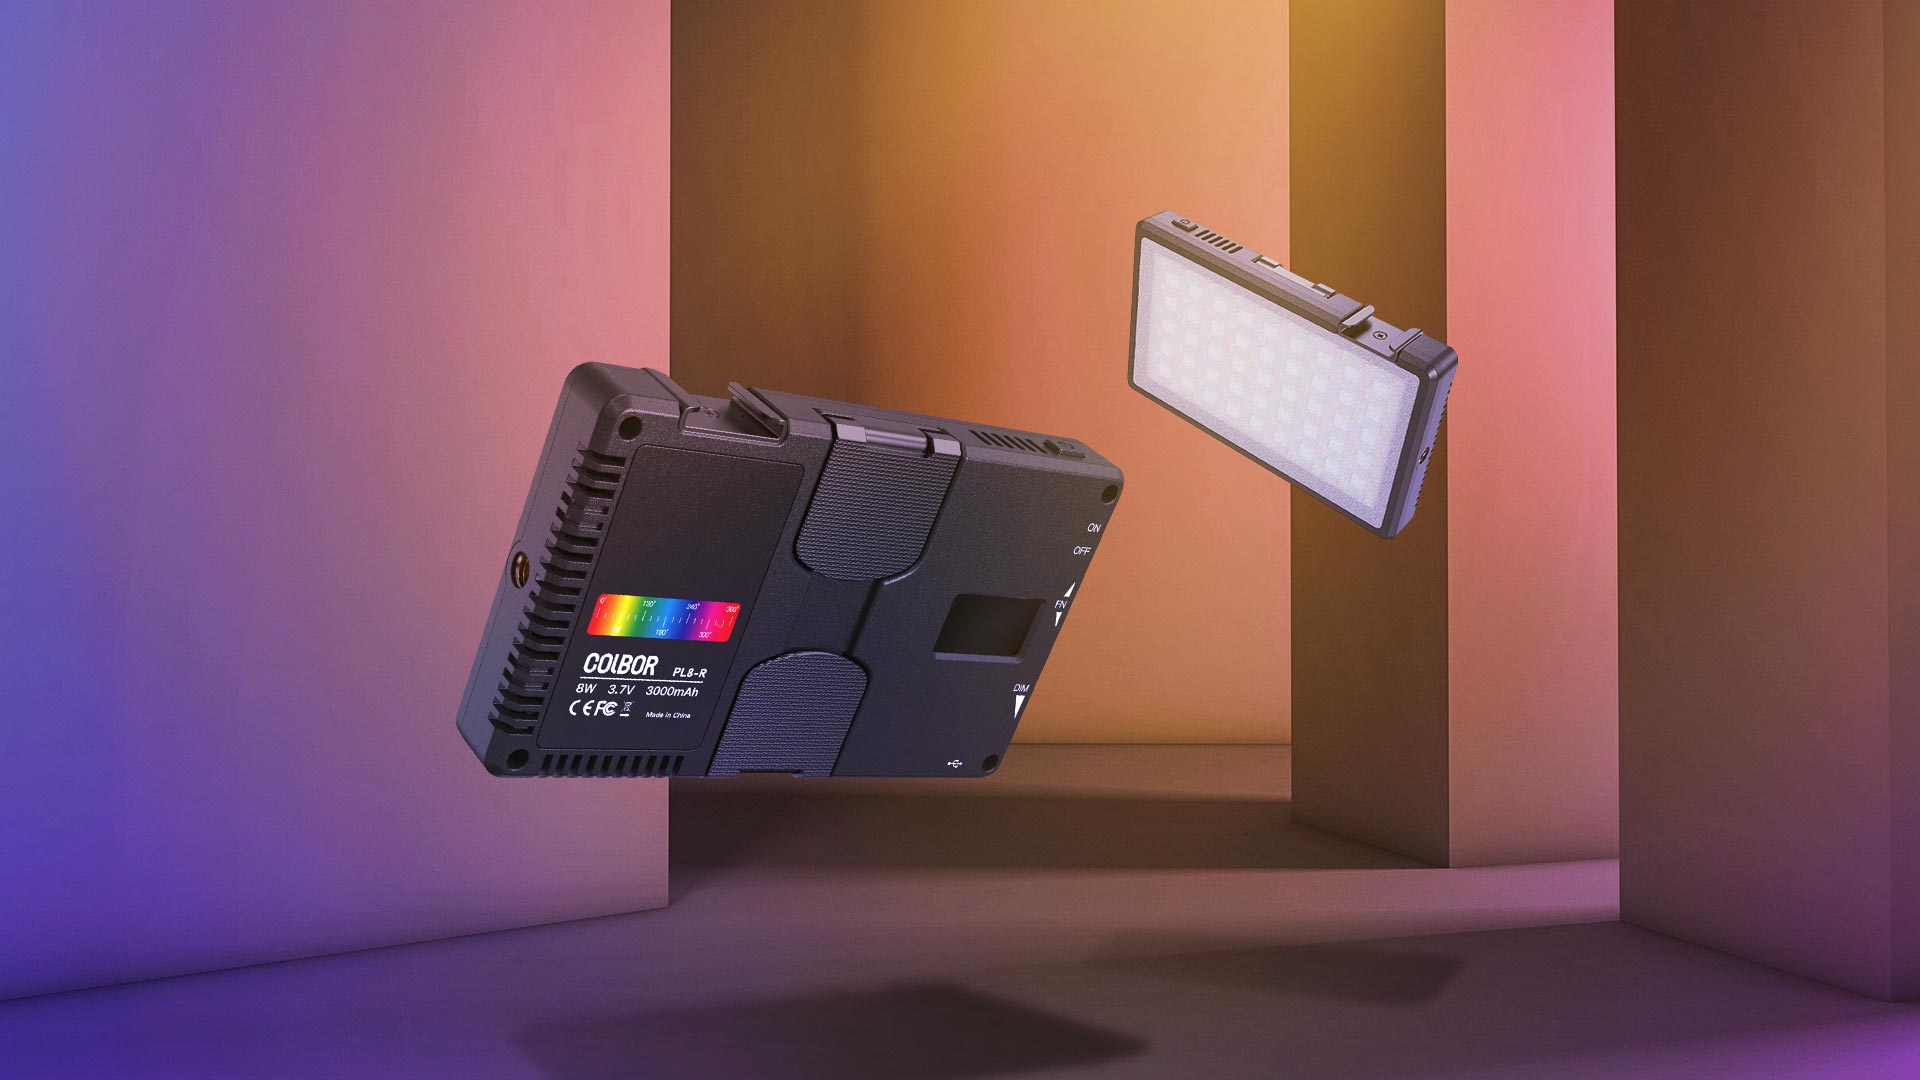 What does RGB stand for and how does it work in photography?